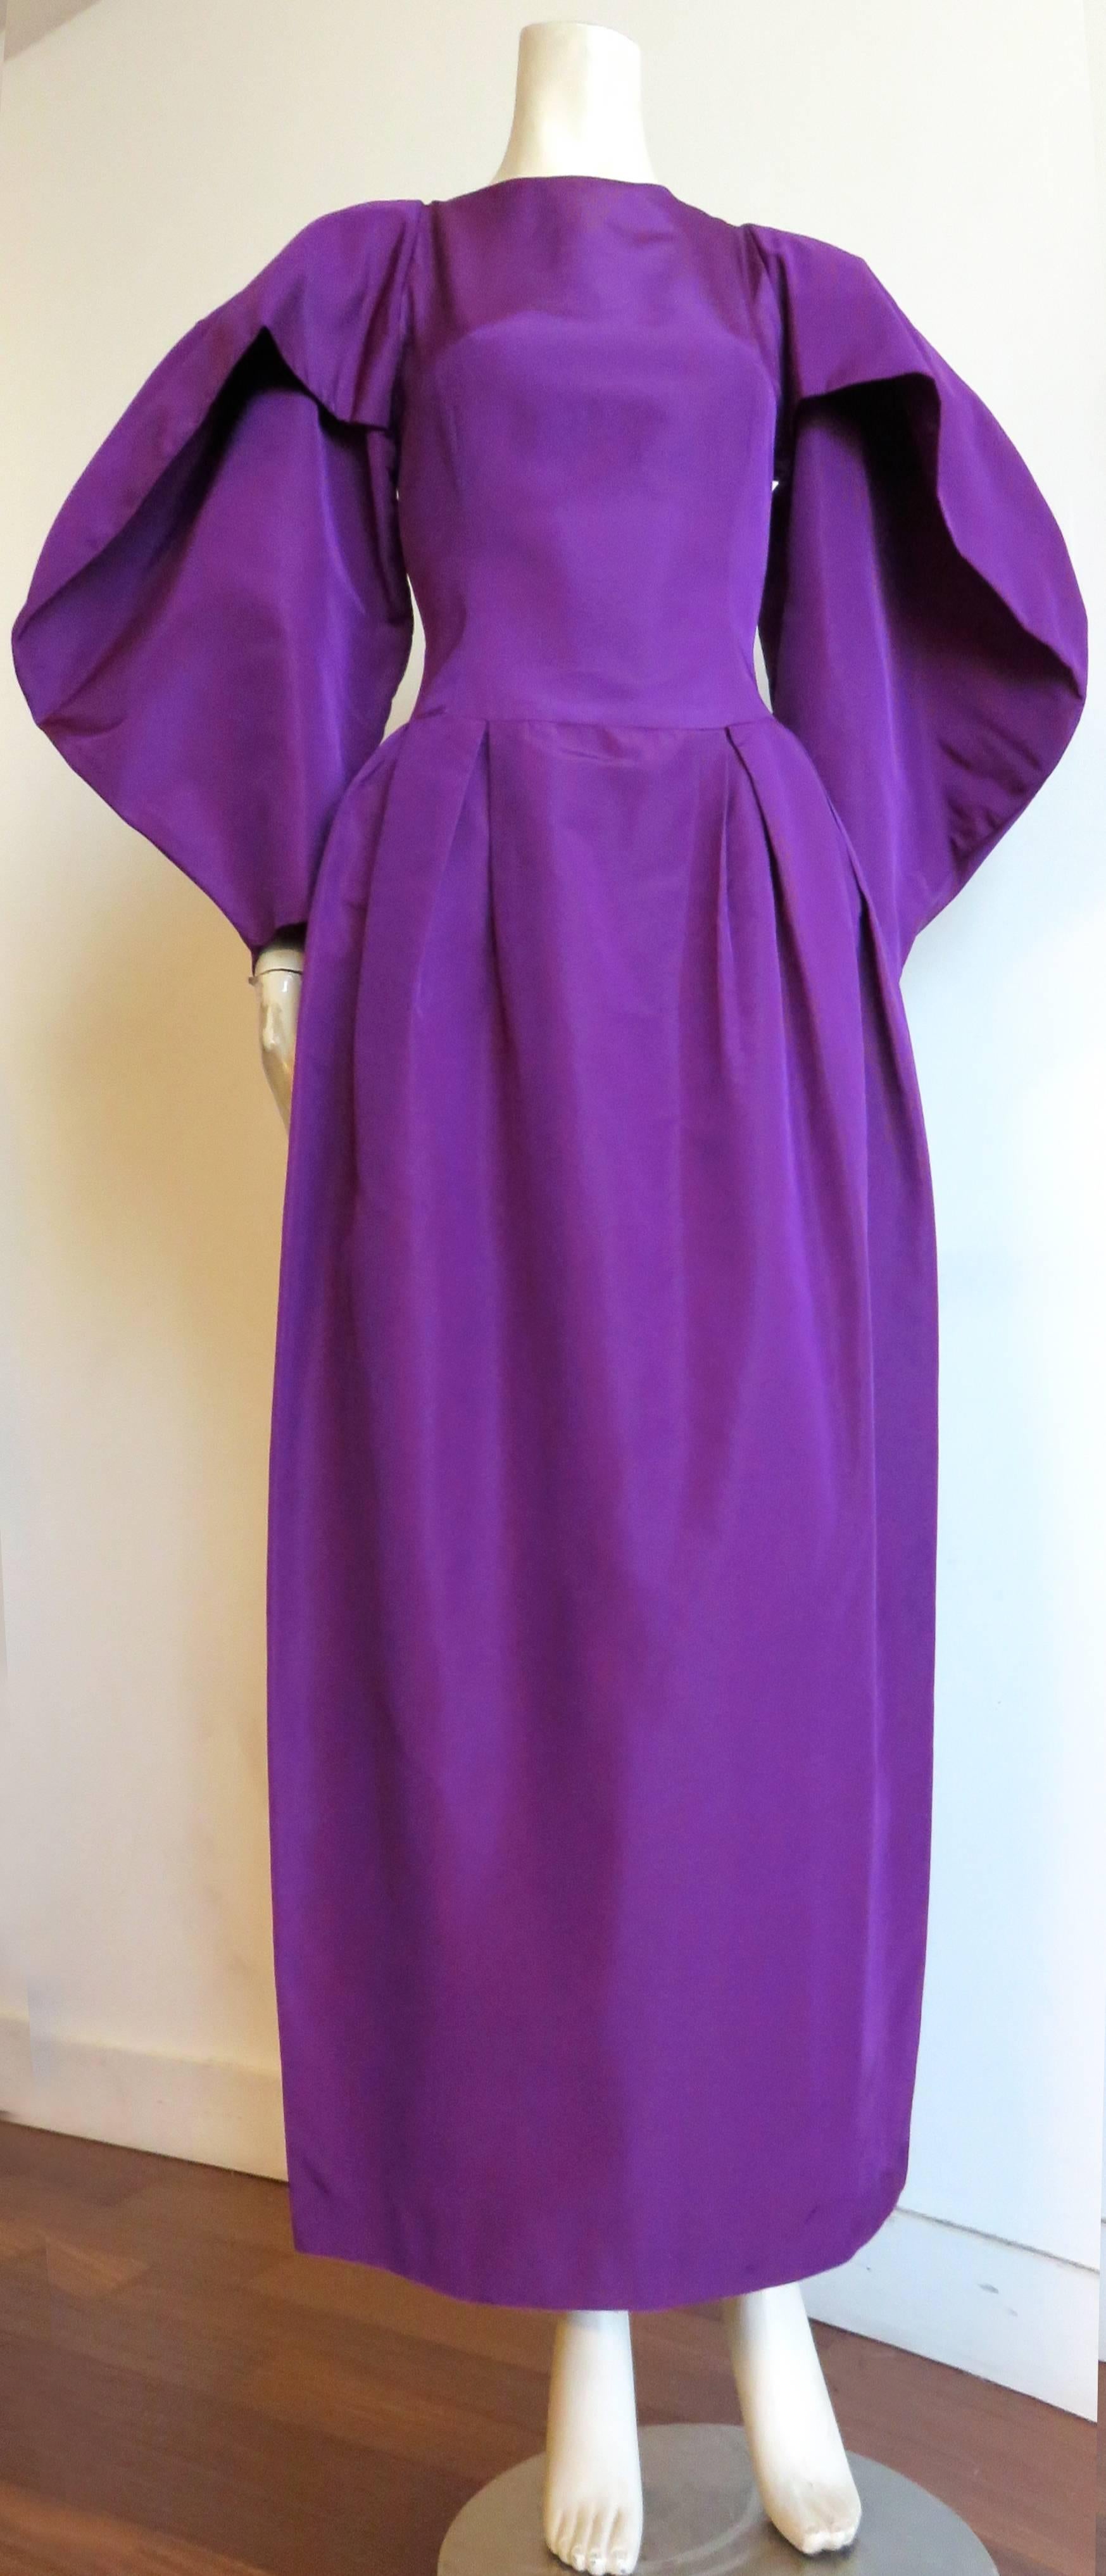 Excellent condition, 1980's CHLOE, by Karl Lagerfeld, silk evening dress.

This amazing dress features exaggerated, circle-shaped, wing sleeves with draped, fold detail at the front.  

Crisp, taffeta weight, pure, silk faille, woven fabrication